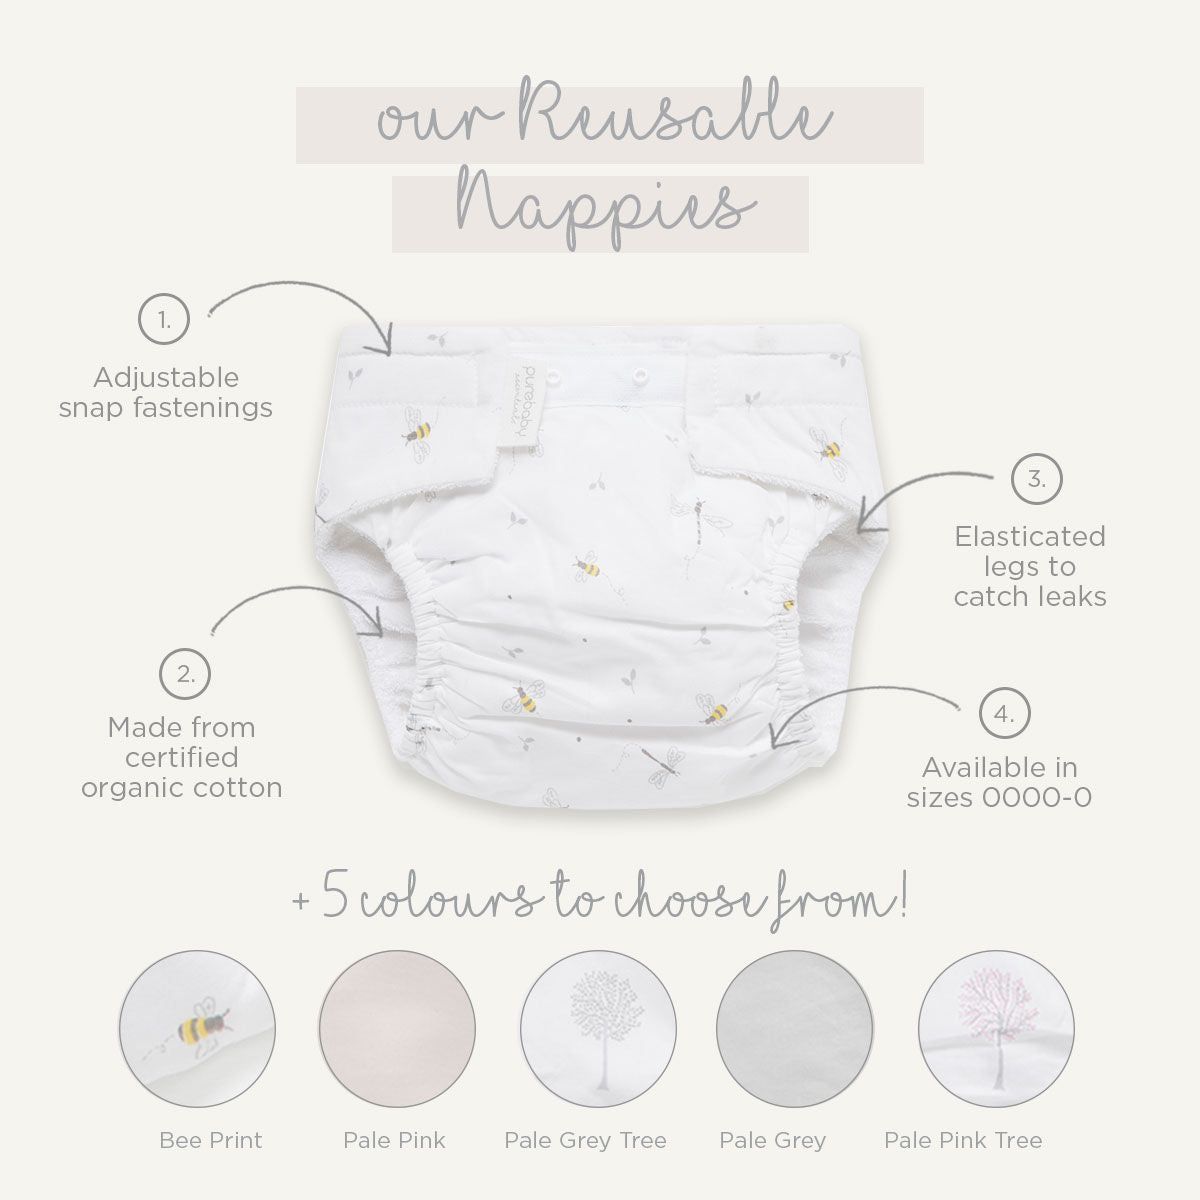 How to Use & Clean Reusable Cloth Nappies